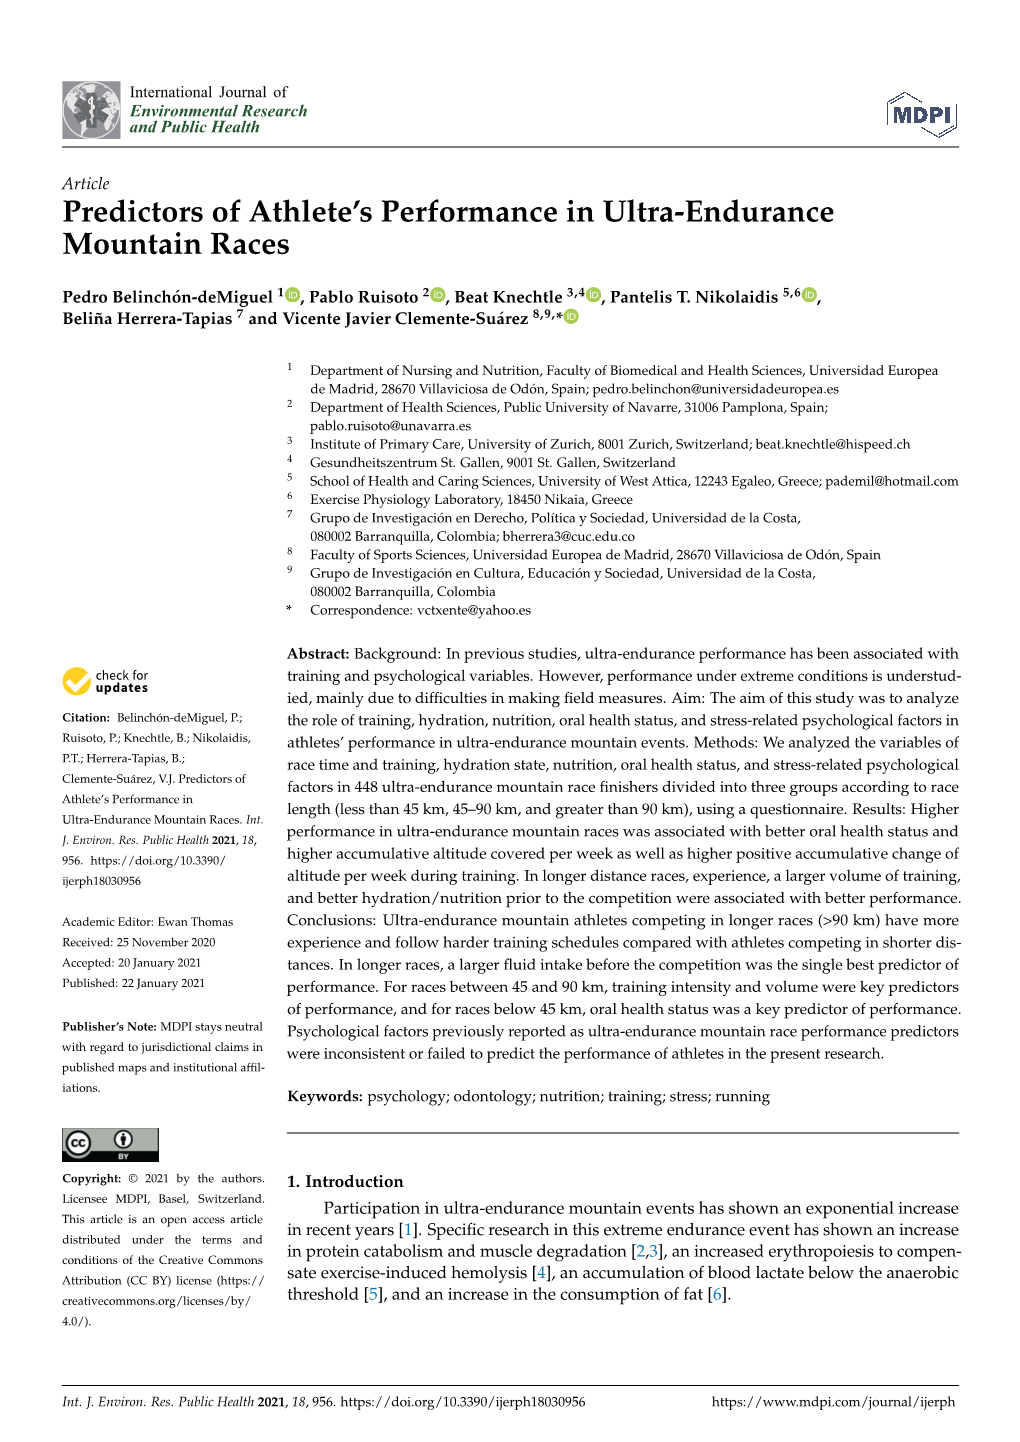 Predictors of Athlete's Performance in Ultra-Endurance Mountain Races